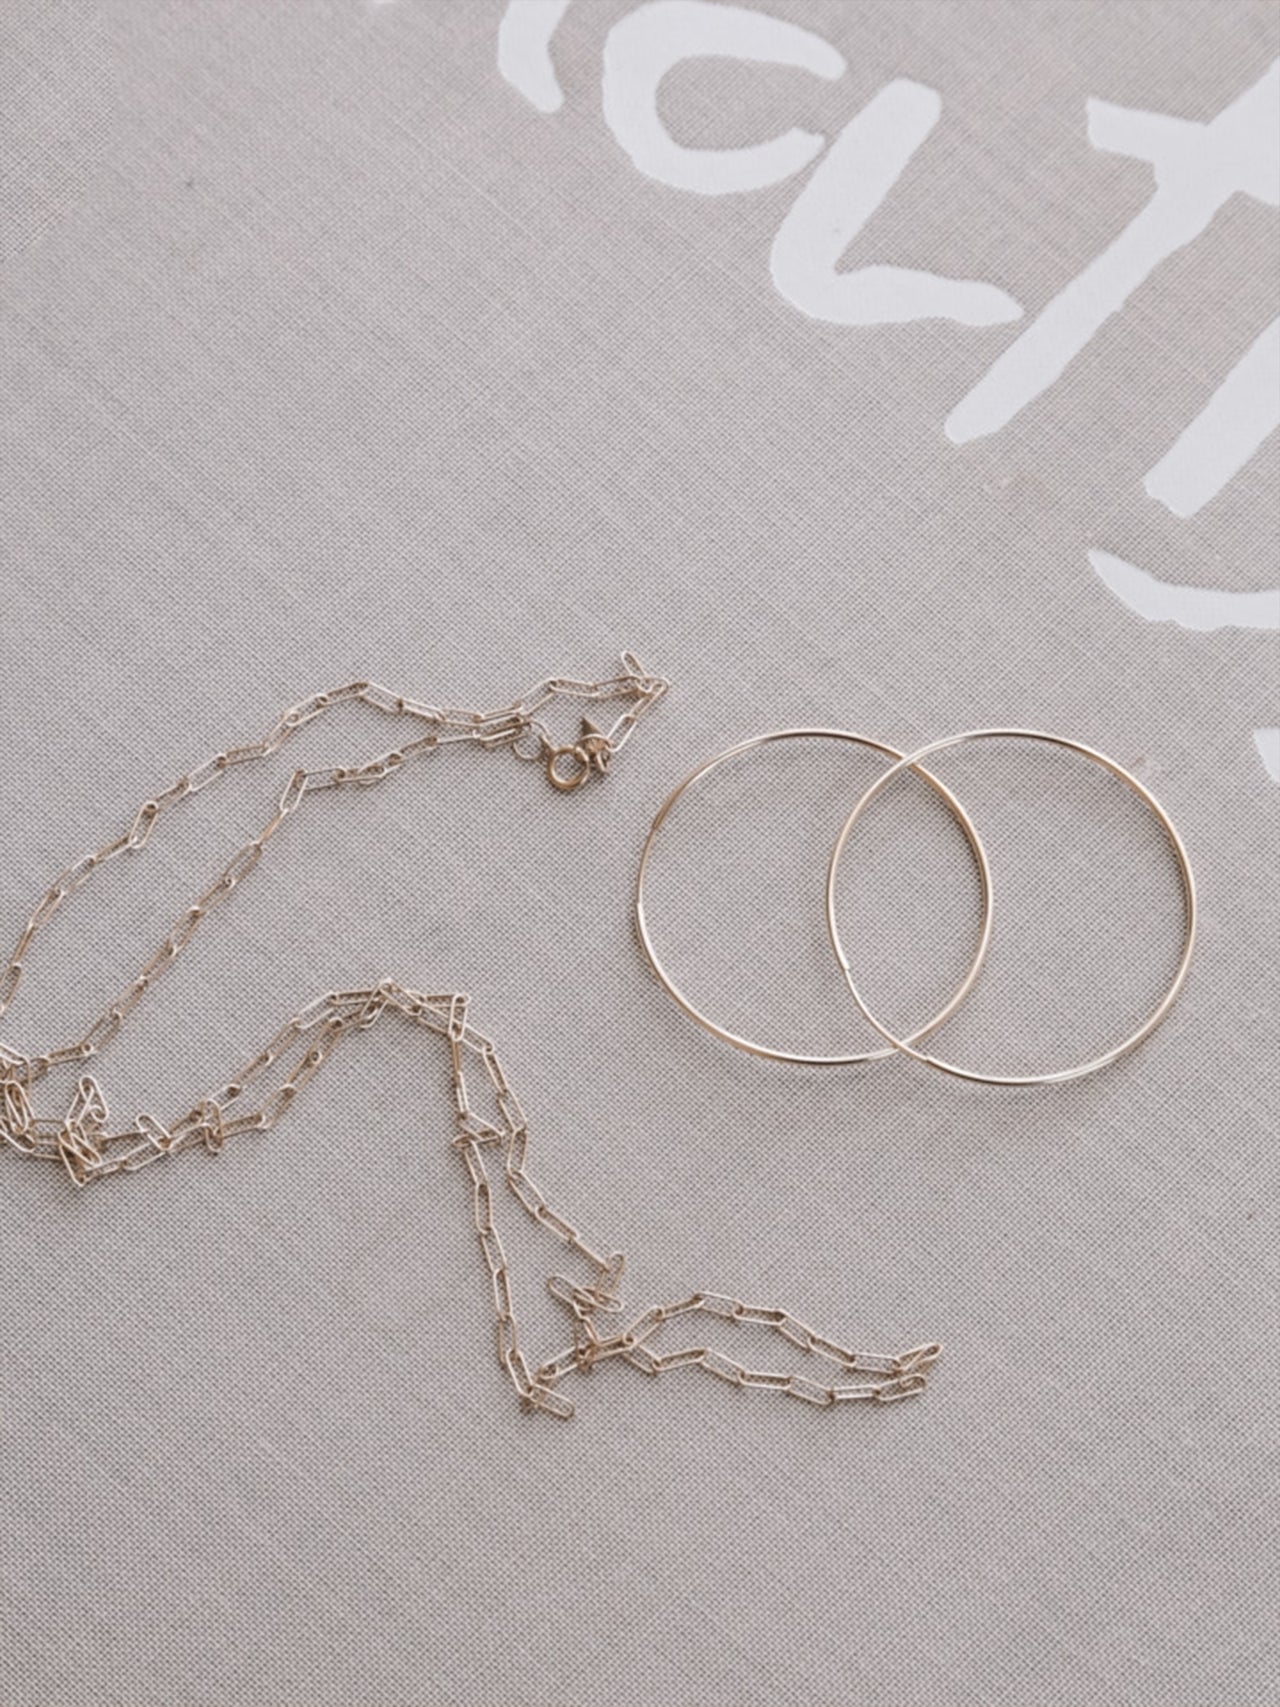 Long Link Chain Necklace styled in flat lay